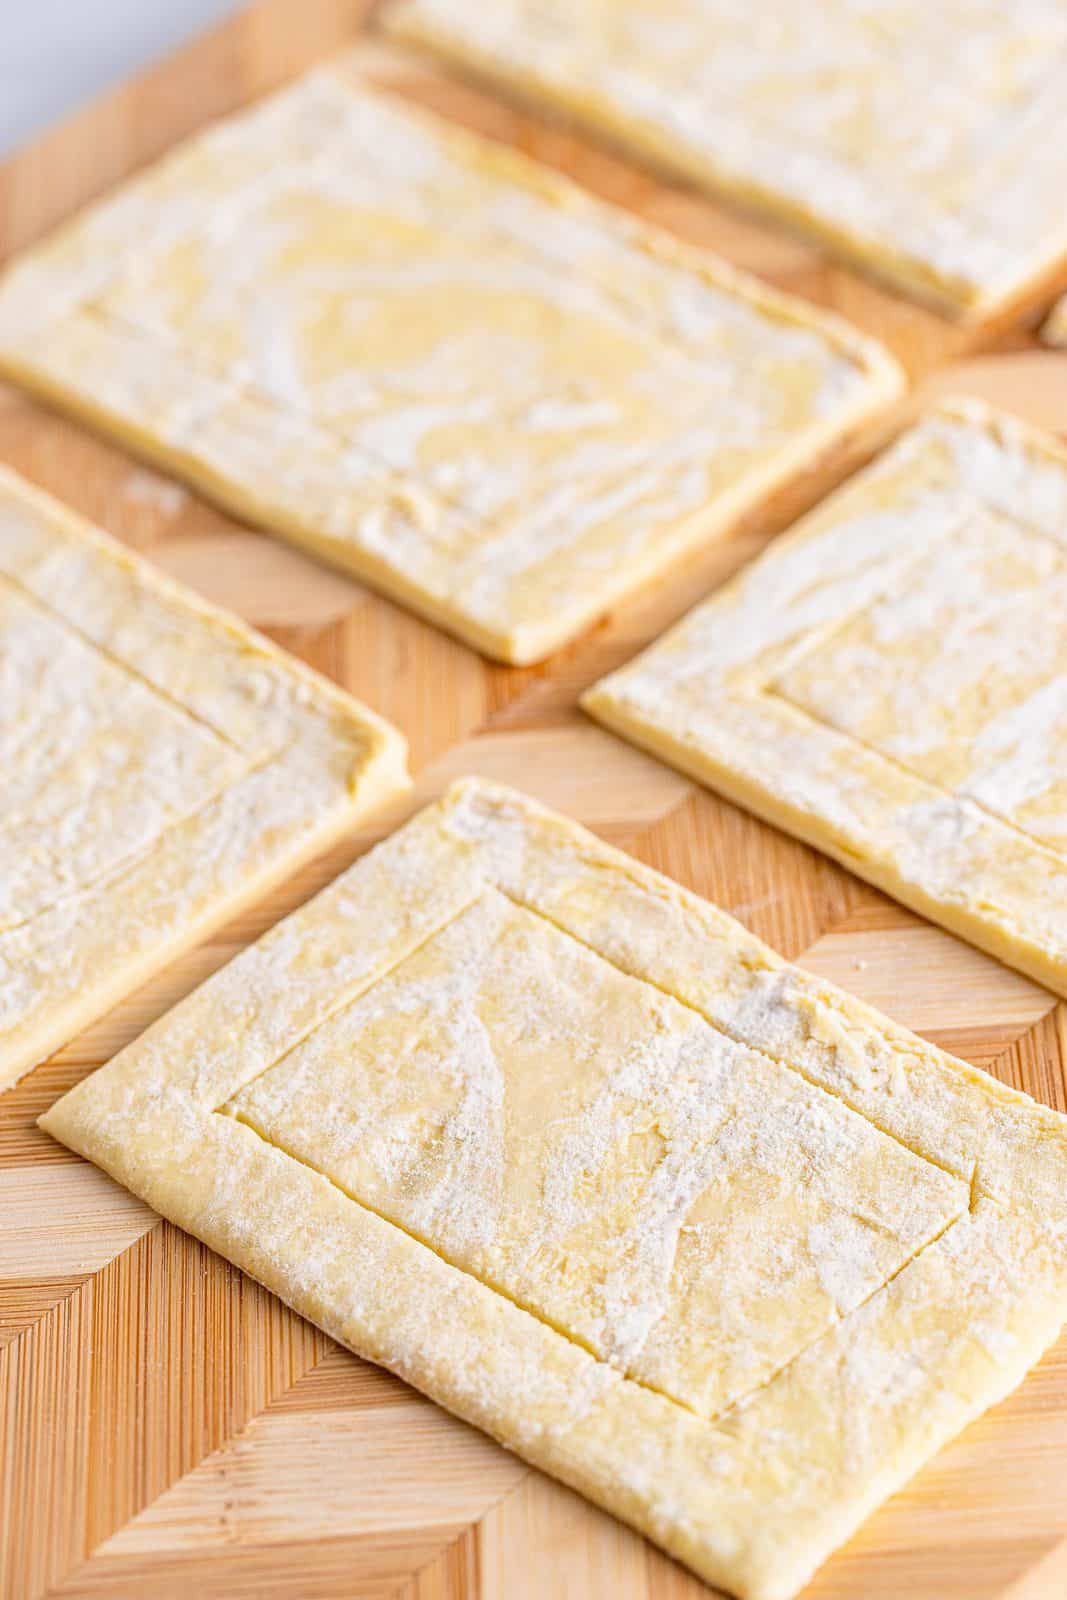 Puff pastry cut into rectangles scored on the sides.